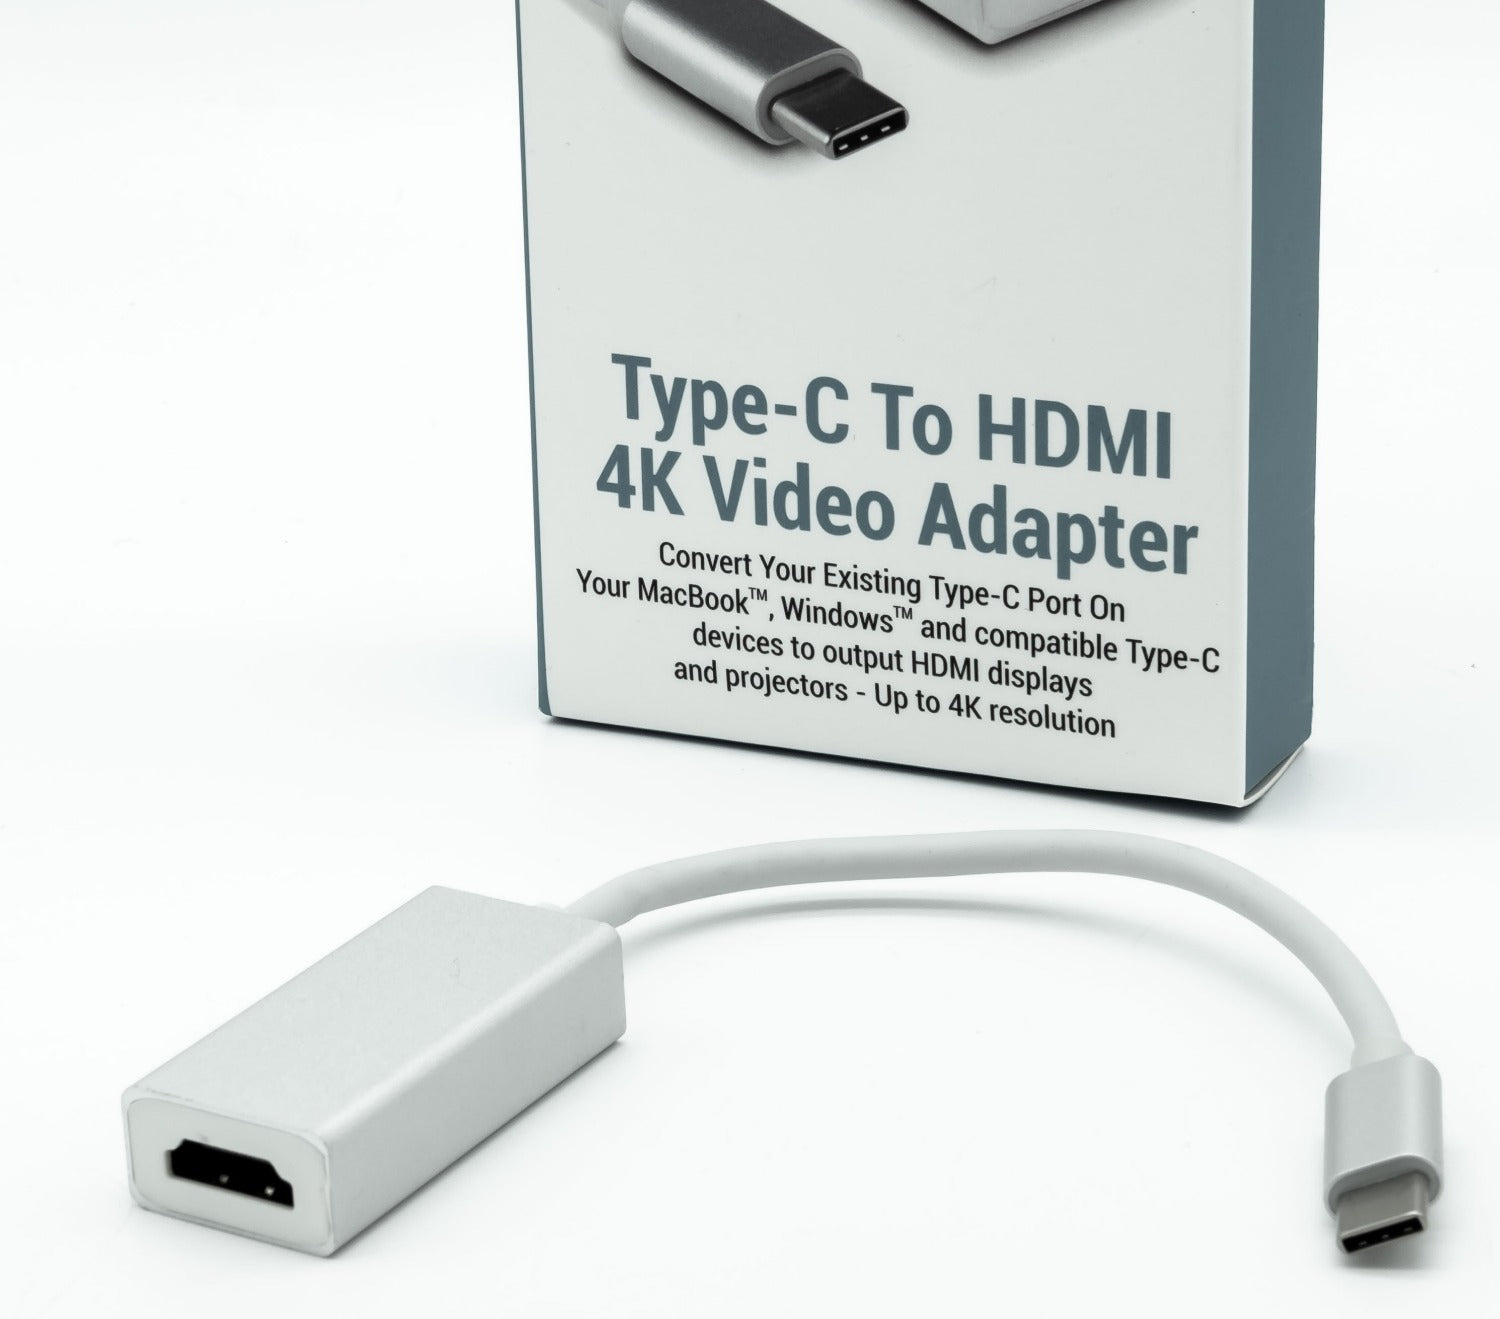 HDMI 4K video adapter for Type-C devices